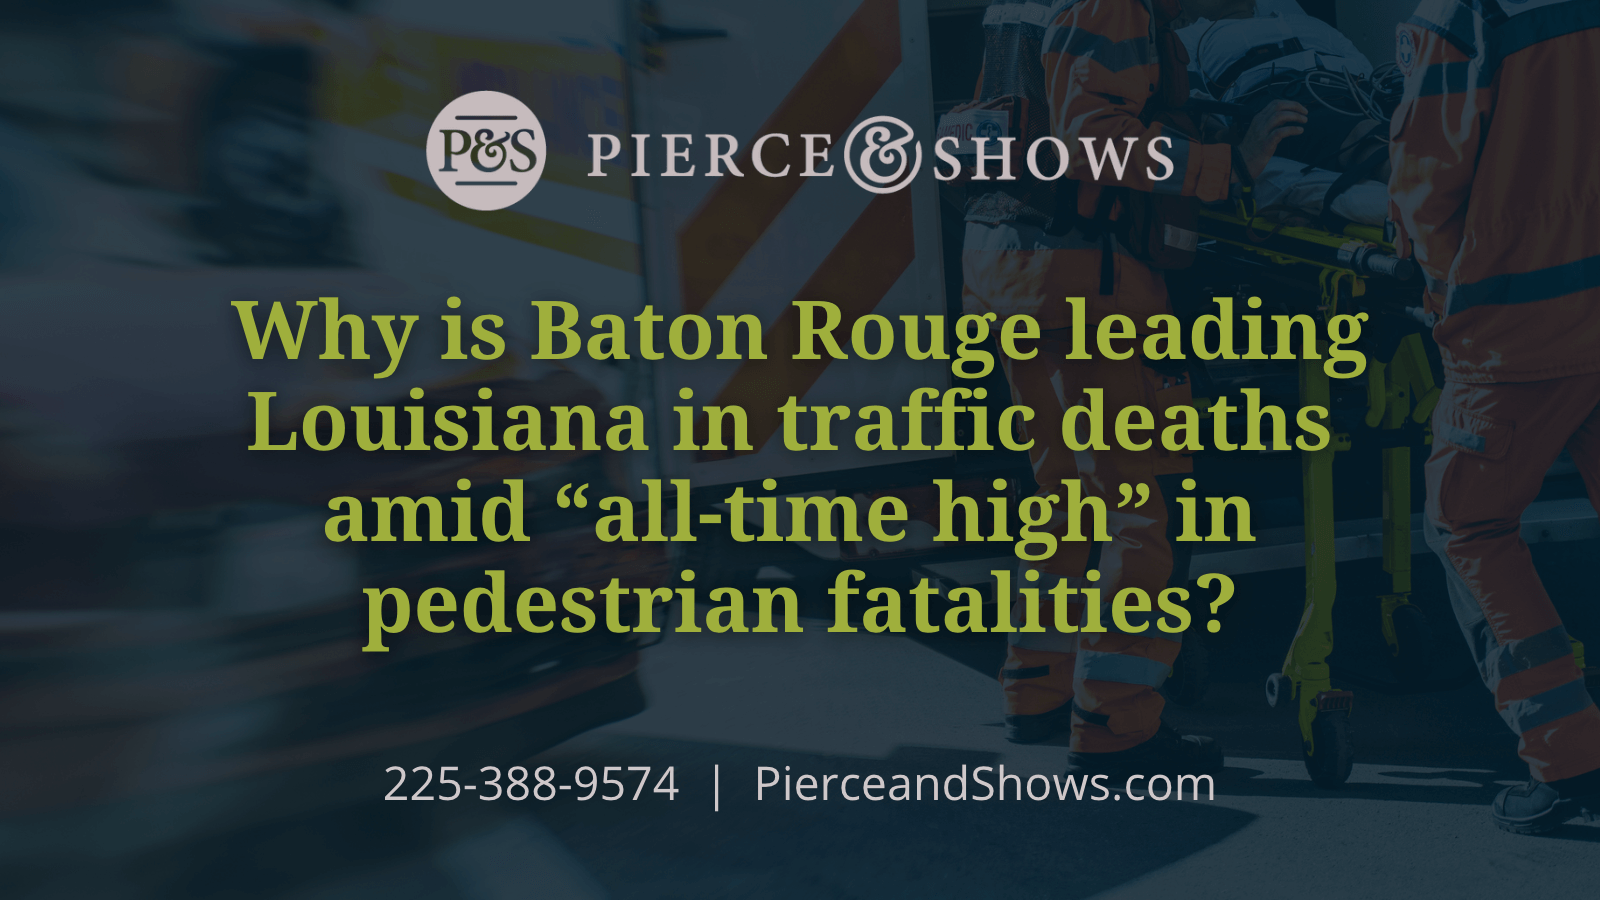 Baton Rouge leading Louisiana in all-time high pedestrian fatalities - Baton Rouge Louisiana injury attorney Pierce & Shows